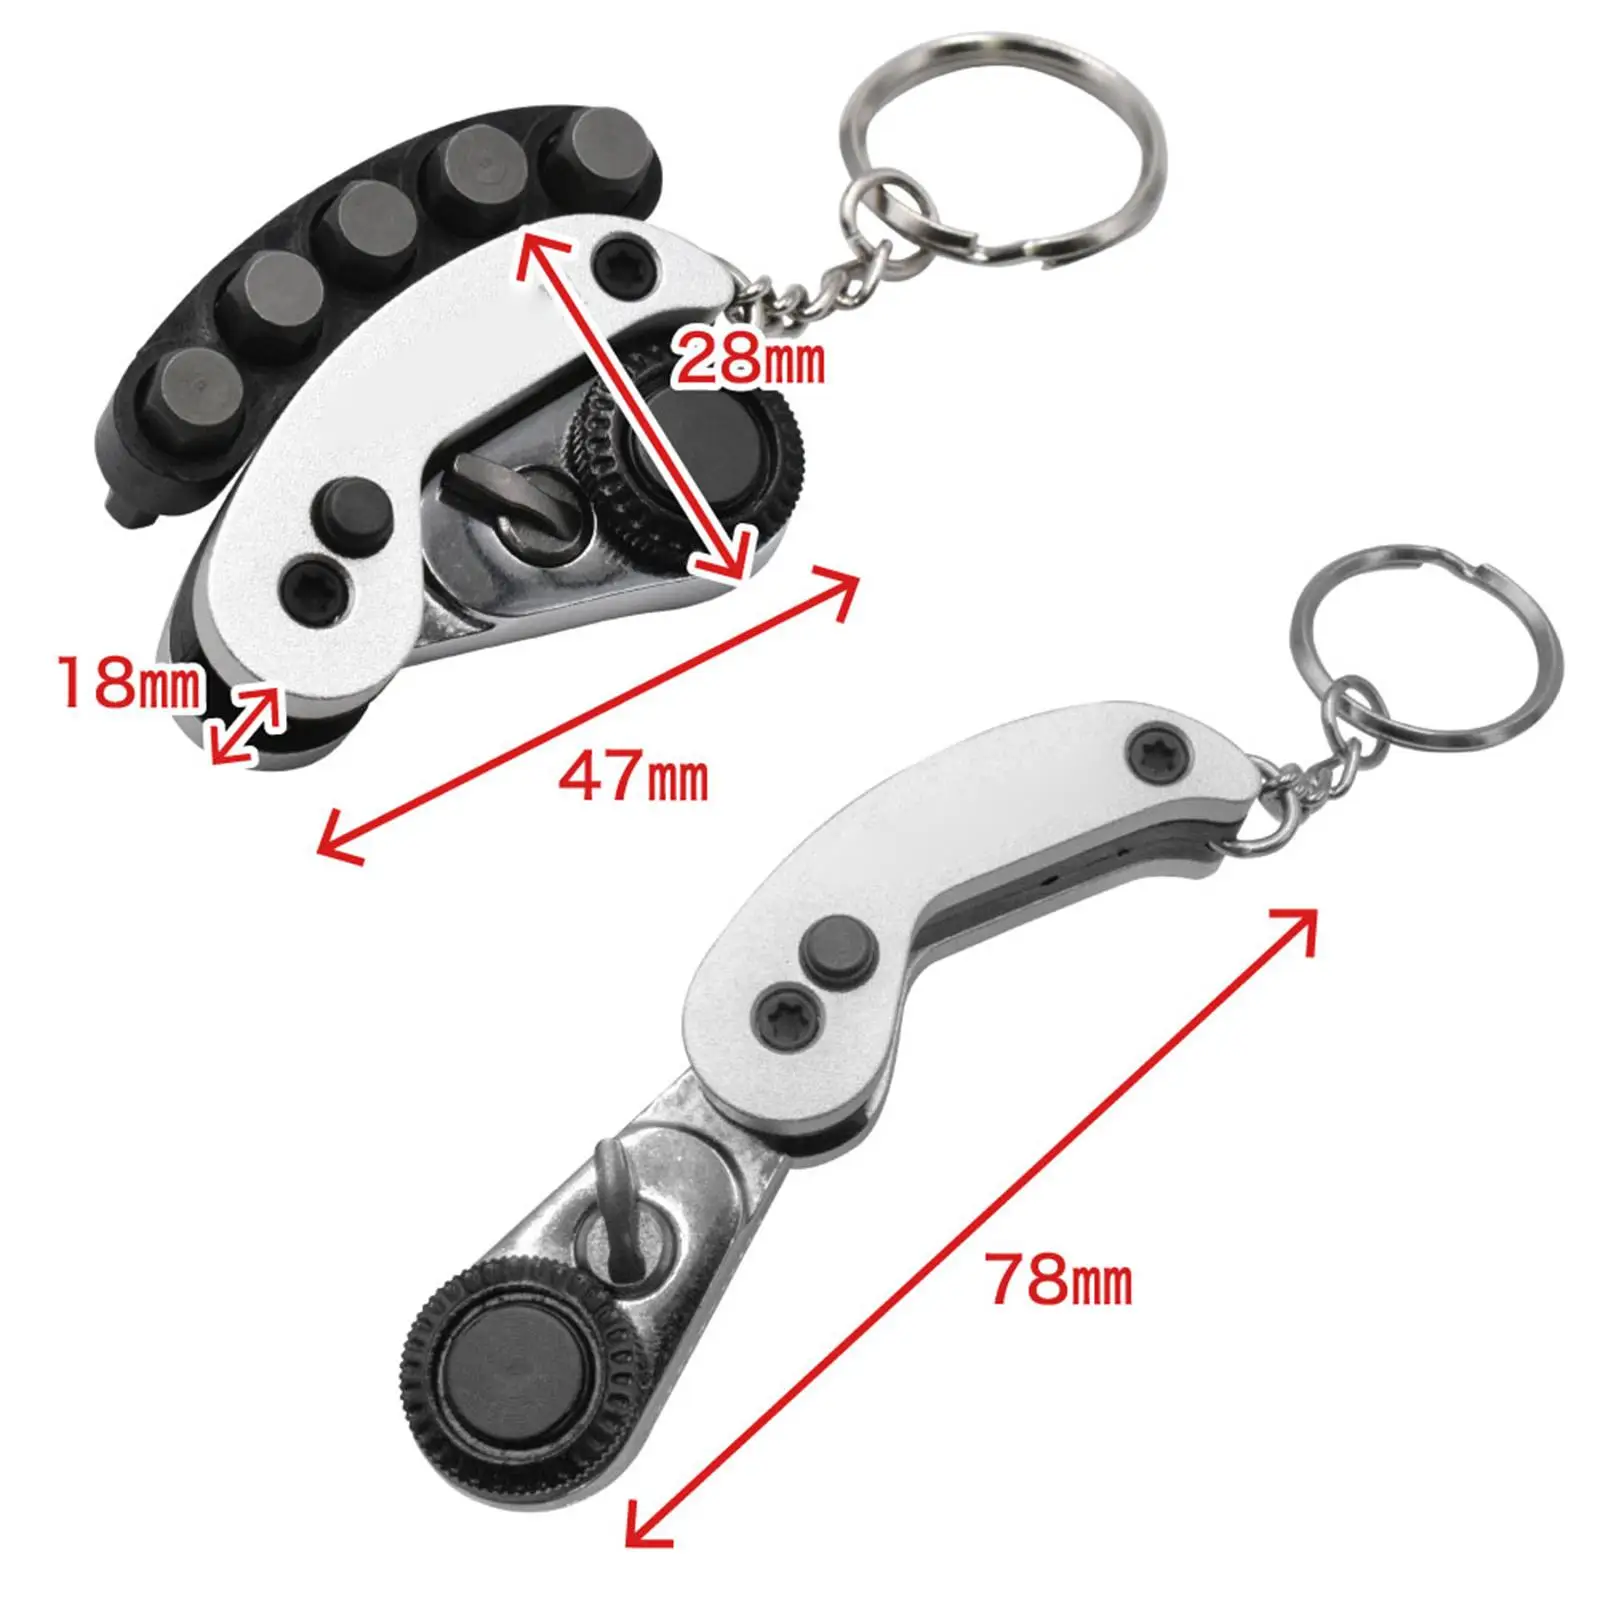 Micro Ratchet Wrench Set Premium Steel Hand Tool Combination Tool for Tight Space Furniture Assembling Home Use Appliance Repair